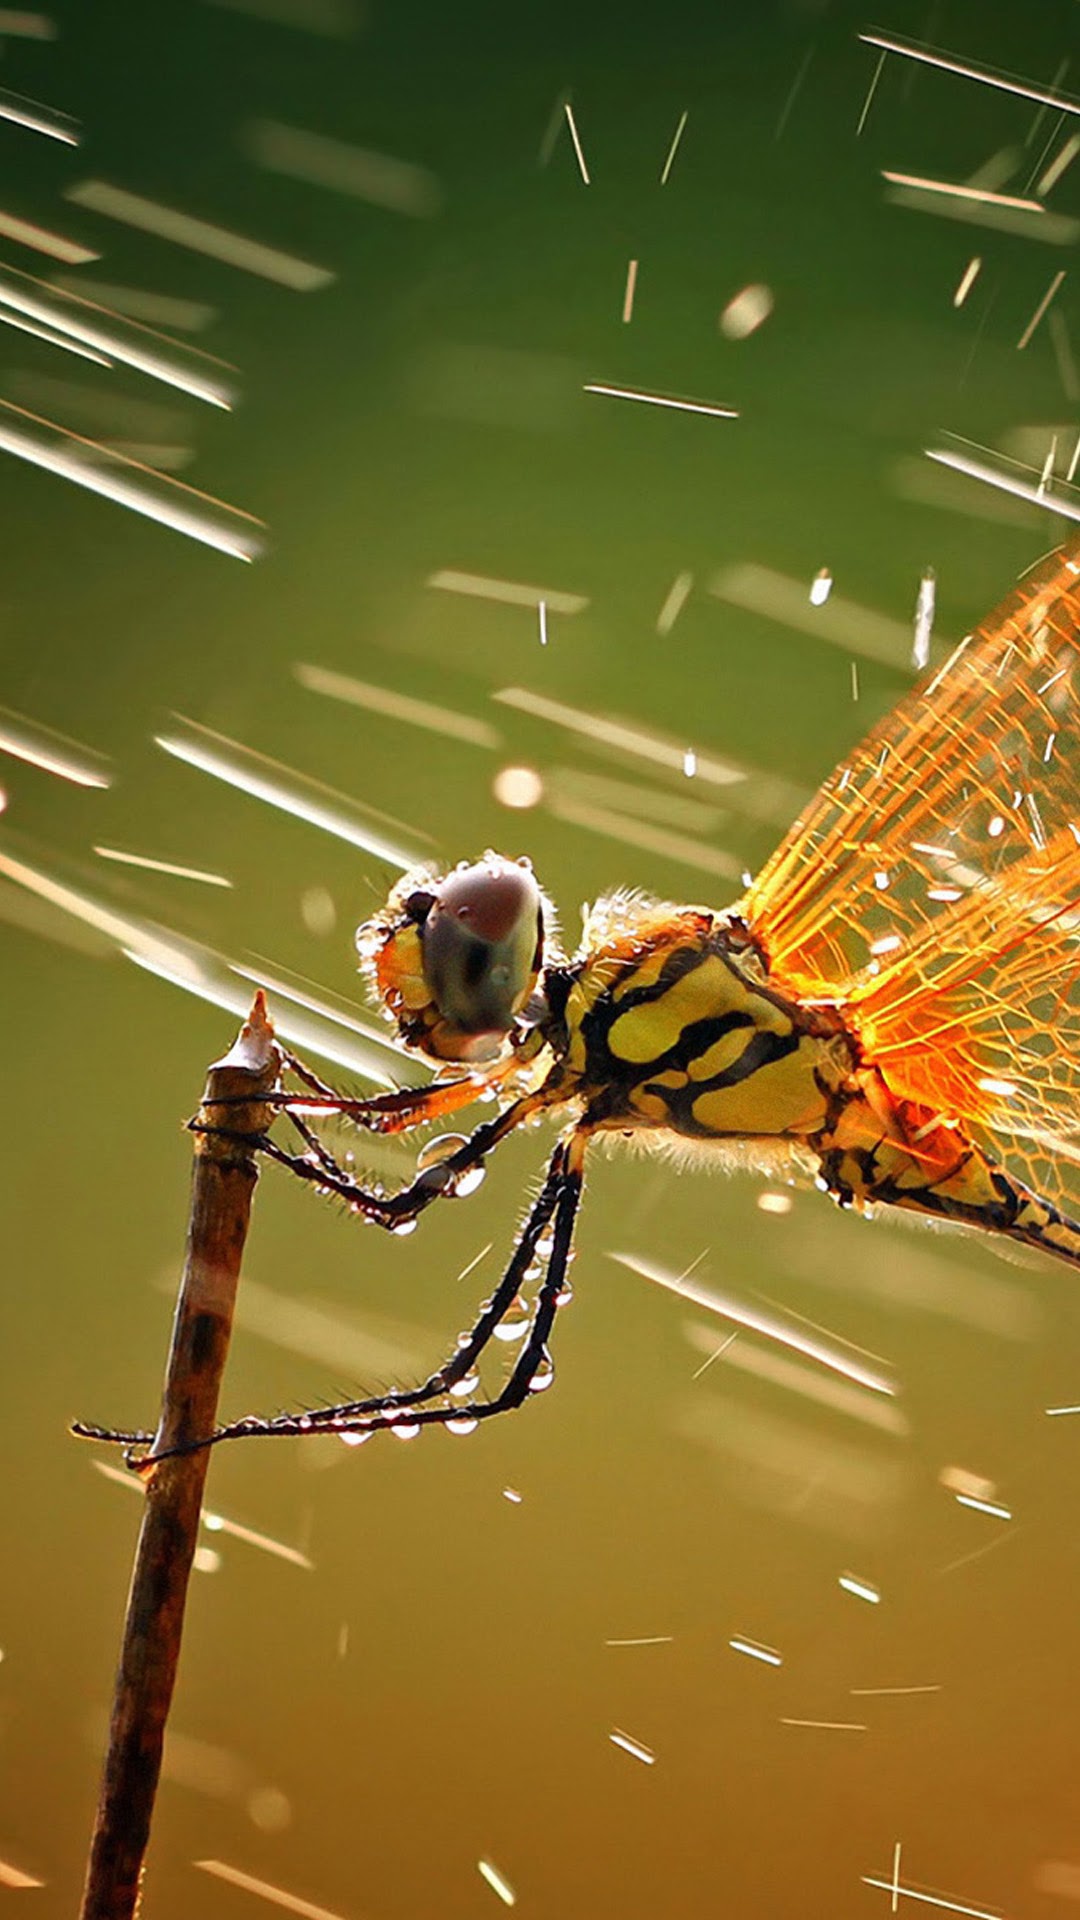 national geographic iphone wallpaper,insect,invertebrate,dragonflies and damseflies,macro photography,spider